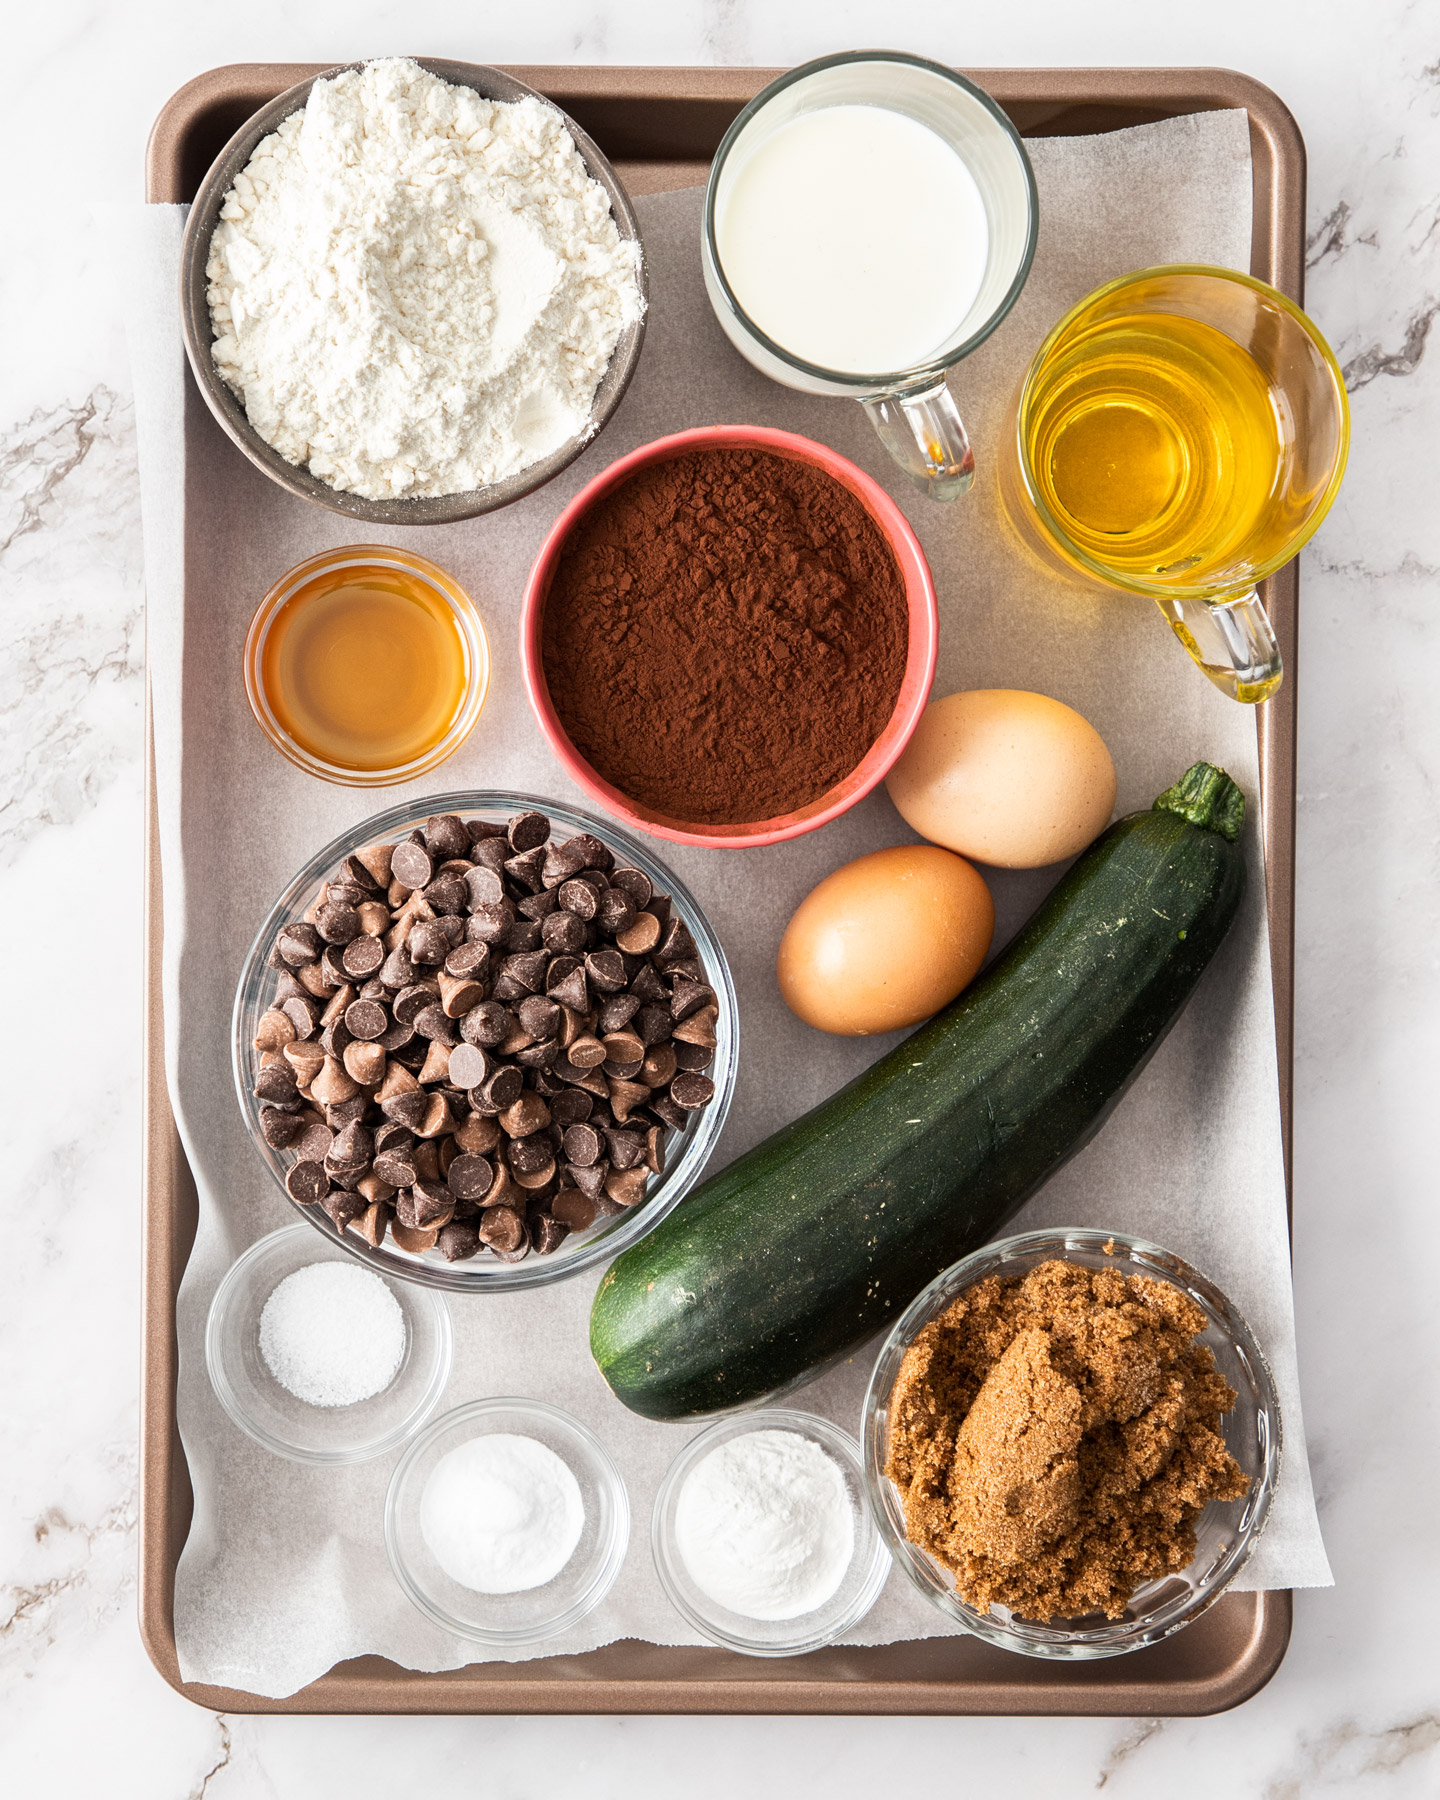 Ingredient for chocolate zucchini cake on a baking tray.